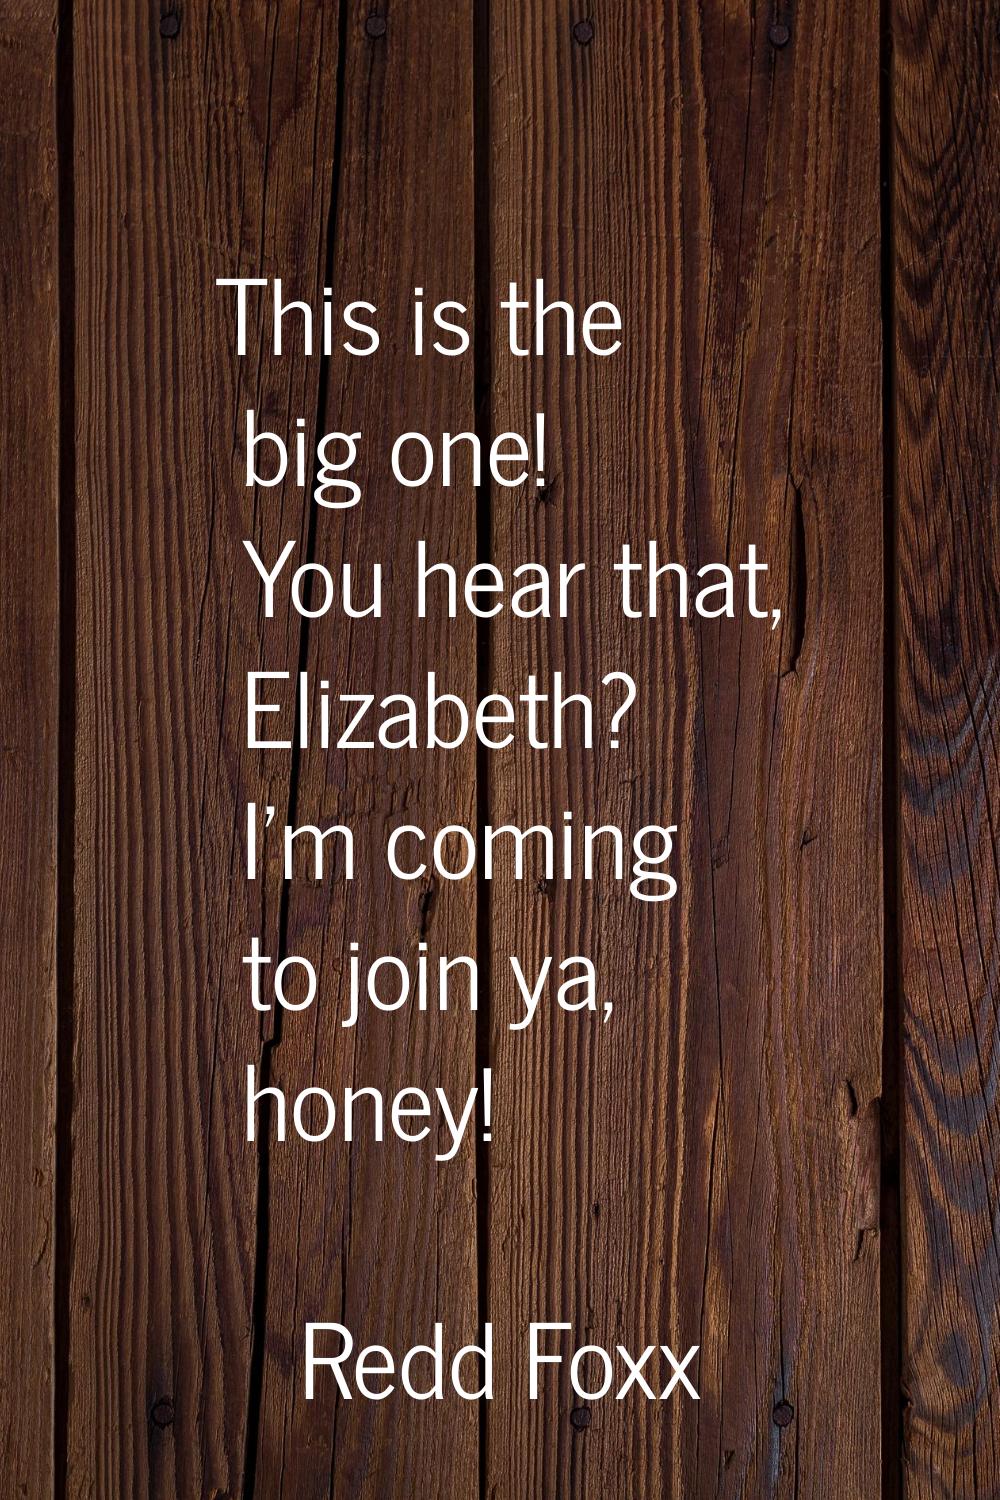 This is the big one! You hear that, Elizabeth? I'm coming to join ya, honey!